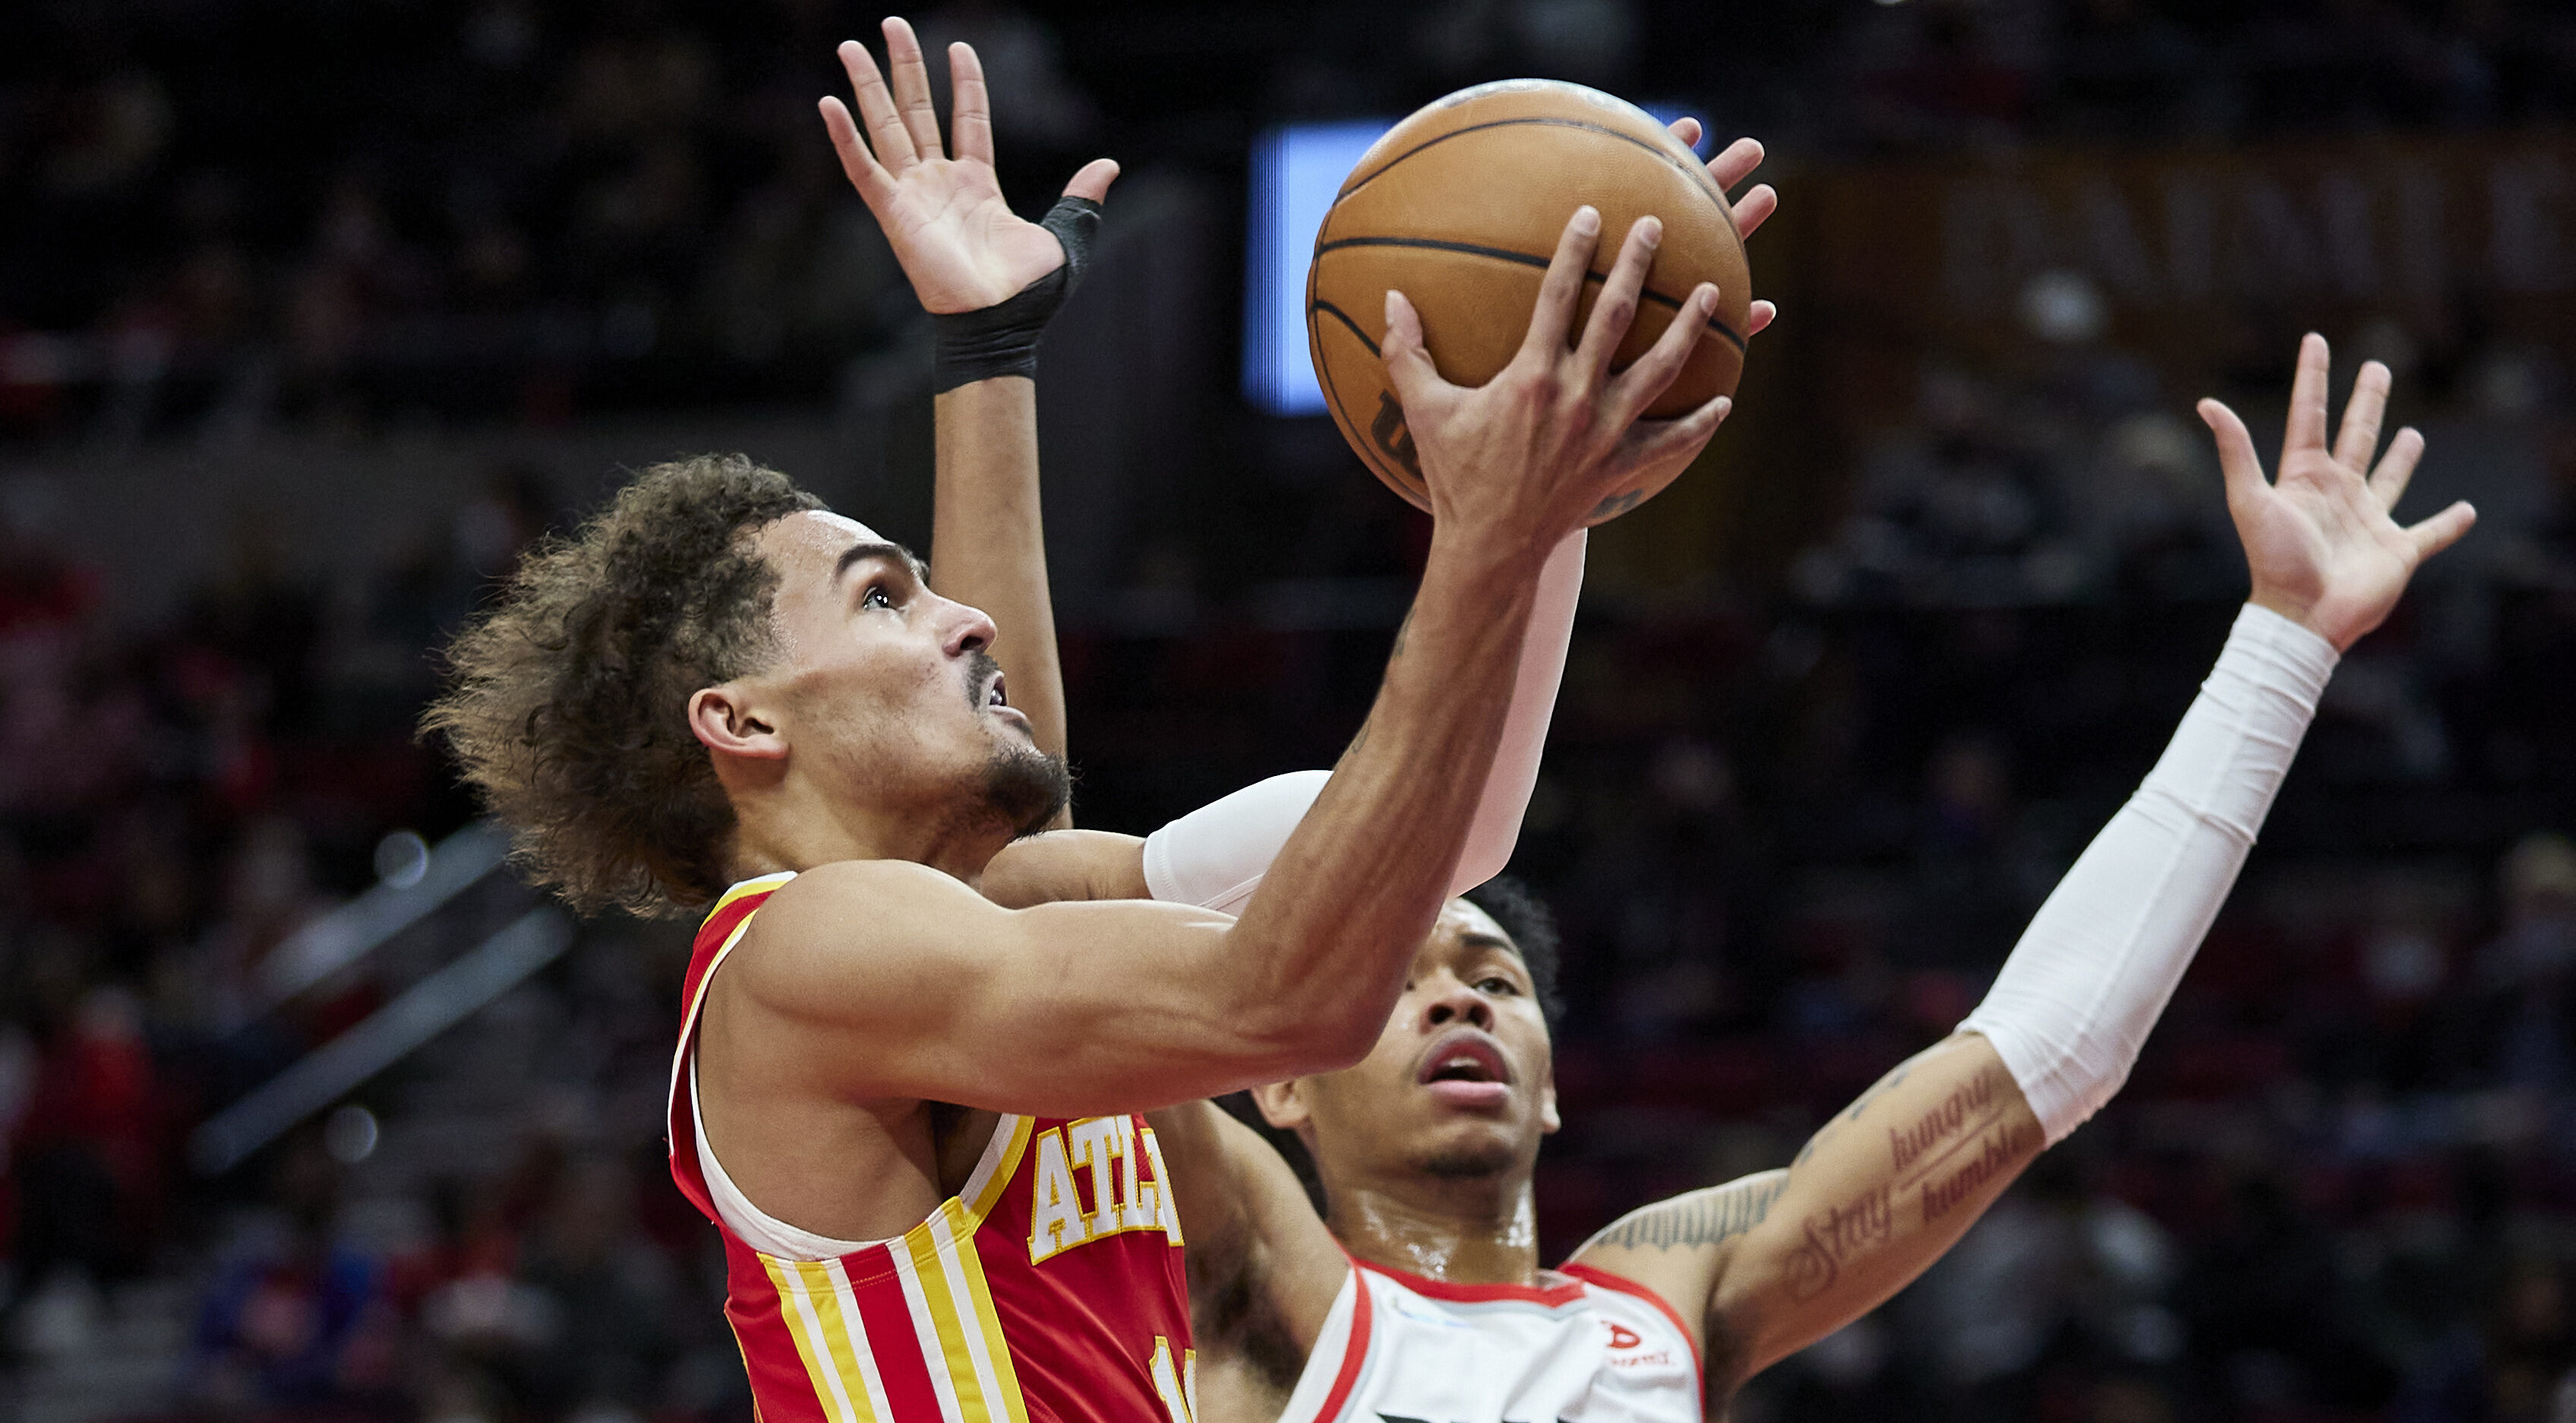 Trae Young: What's the 'new weapon' he claims has elevated his